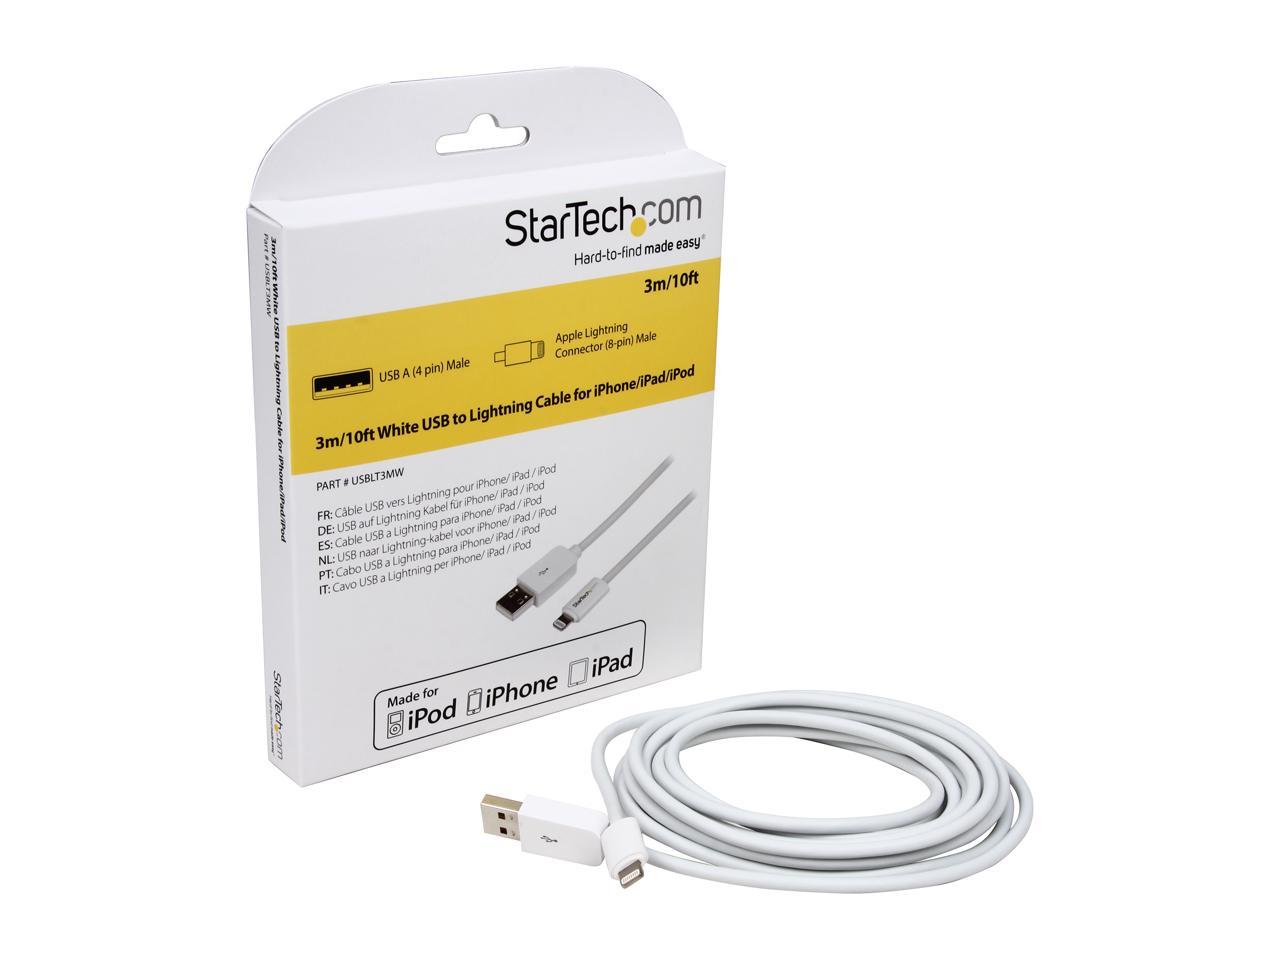 StarTech.com USBLT3MW 3m (10ft) Long White Apple® 8-pin Lightning Connector to USB Cable for iPhone / iPod / - Charge and Sync - Newegg.com